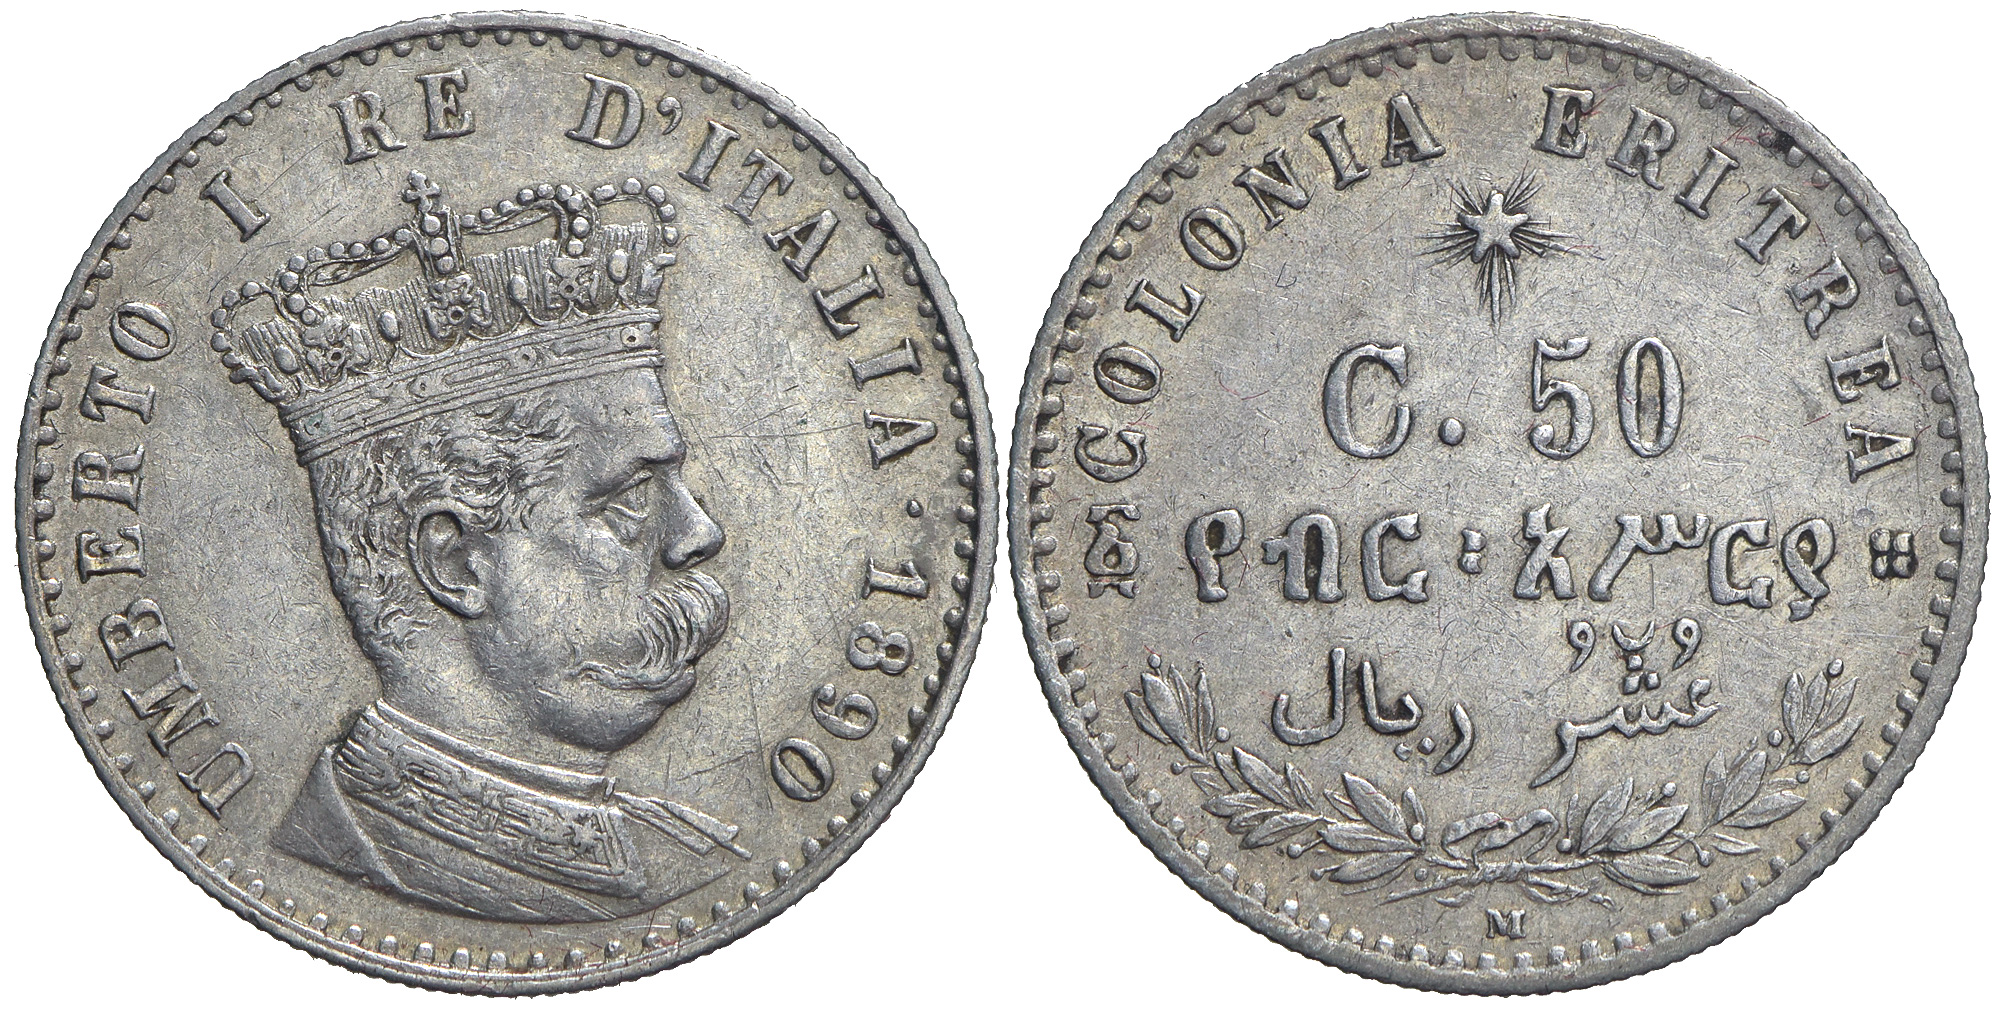 Eritrea Colonial Coinage Umberto Cent 1890 